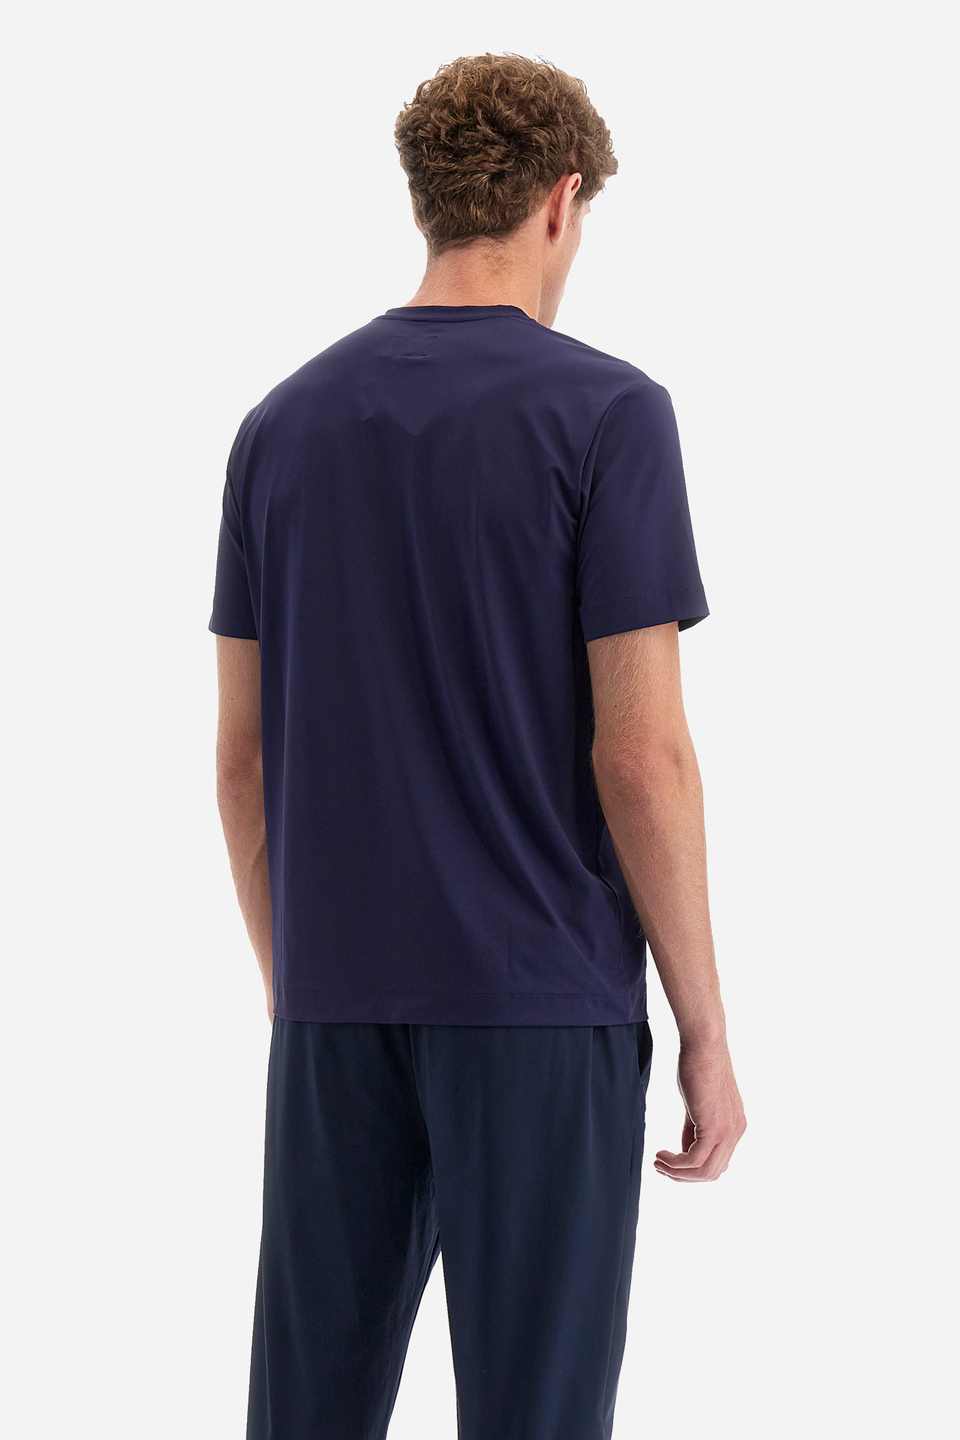 Regular-fit T-shirt in synthetic fabric - Ynyr | La Martina - Official Online Shop